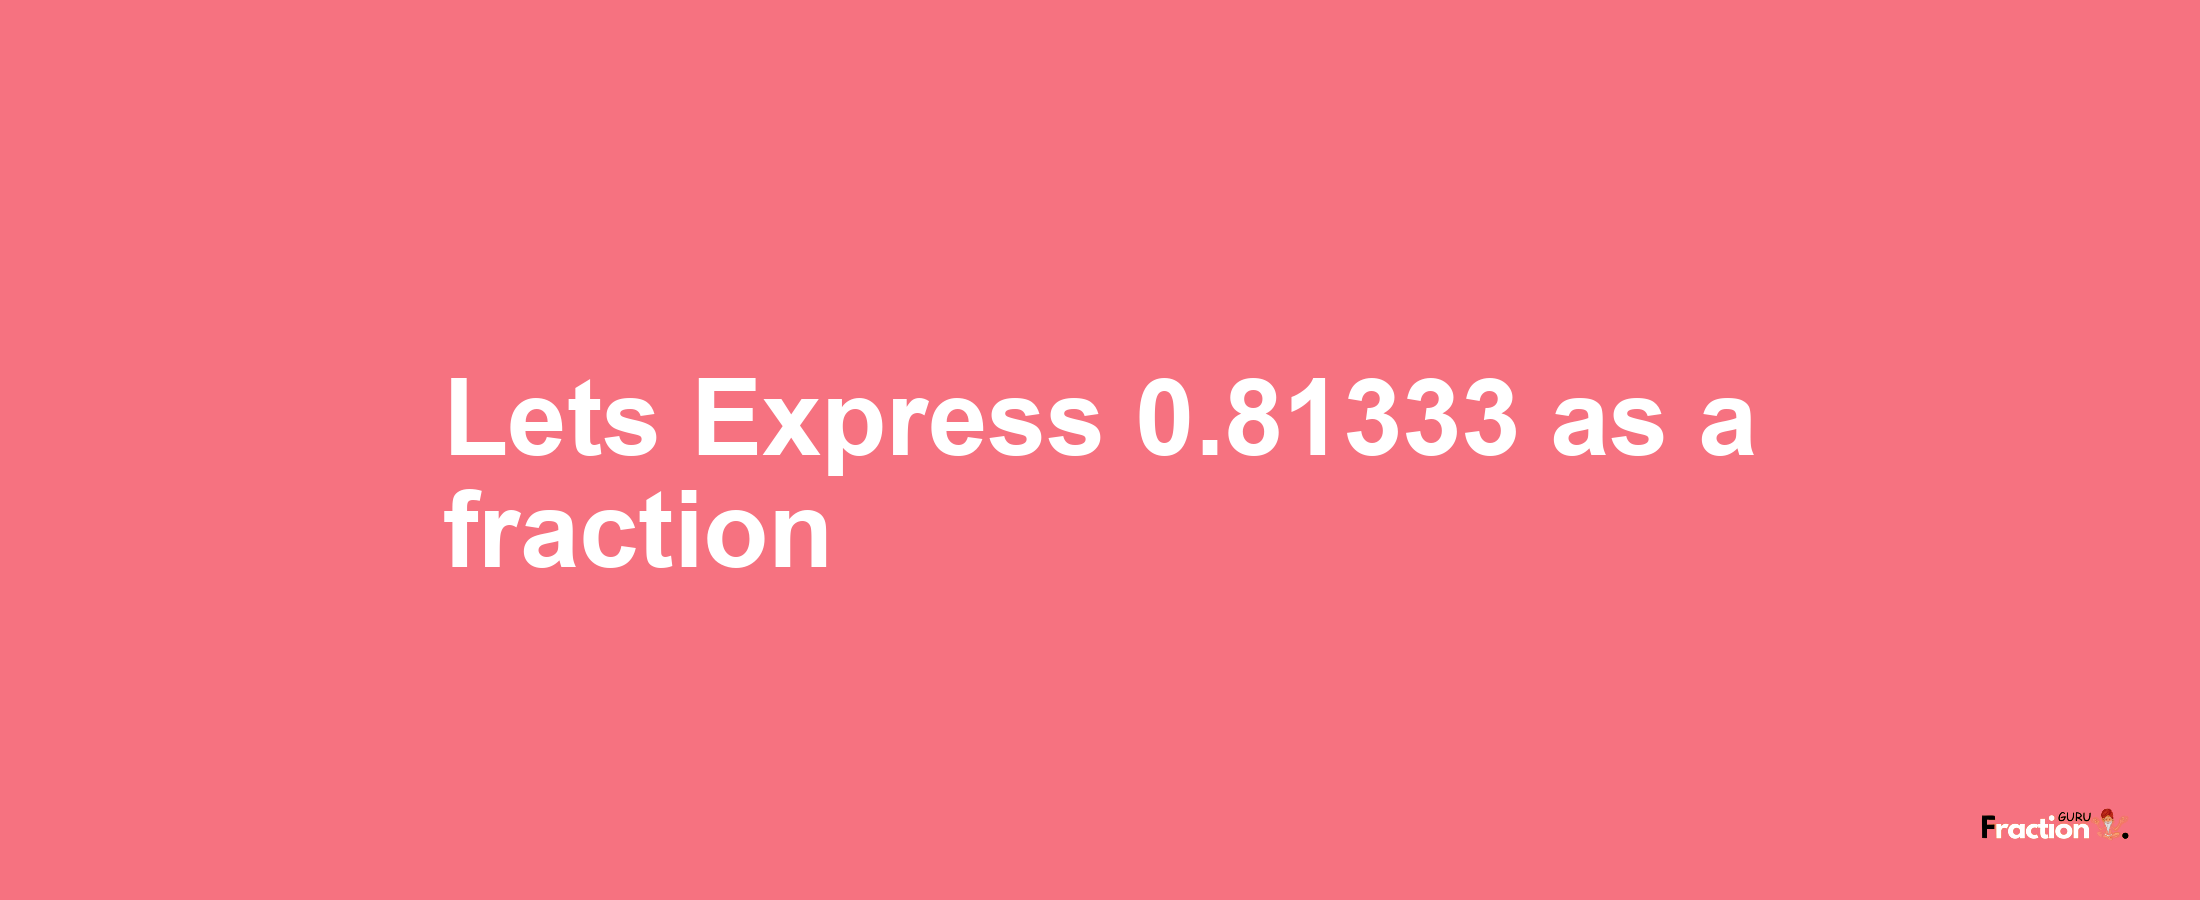 Lets Express 0.81333 as afraction